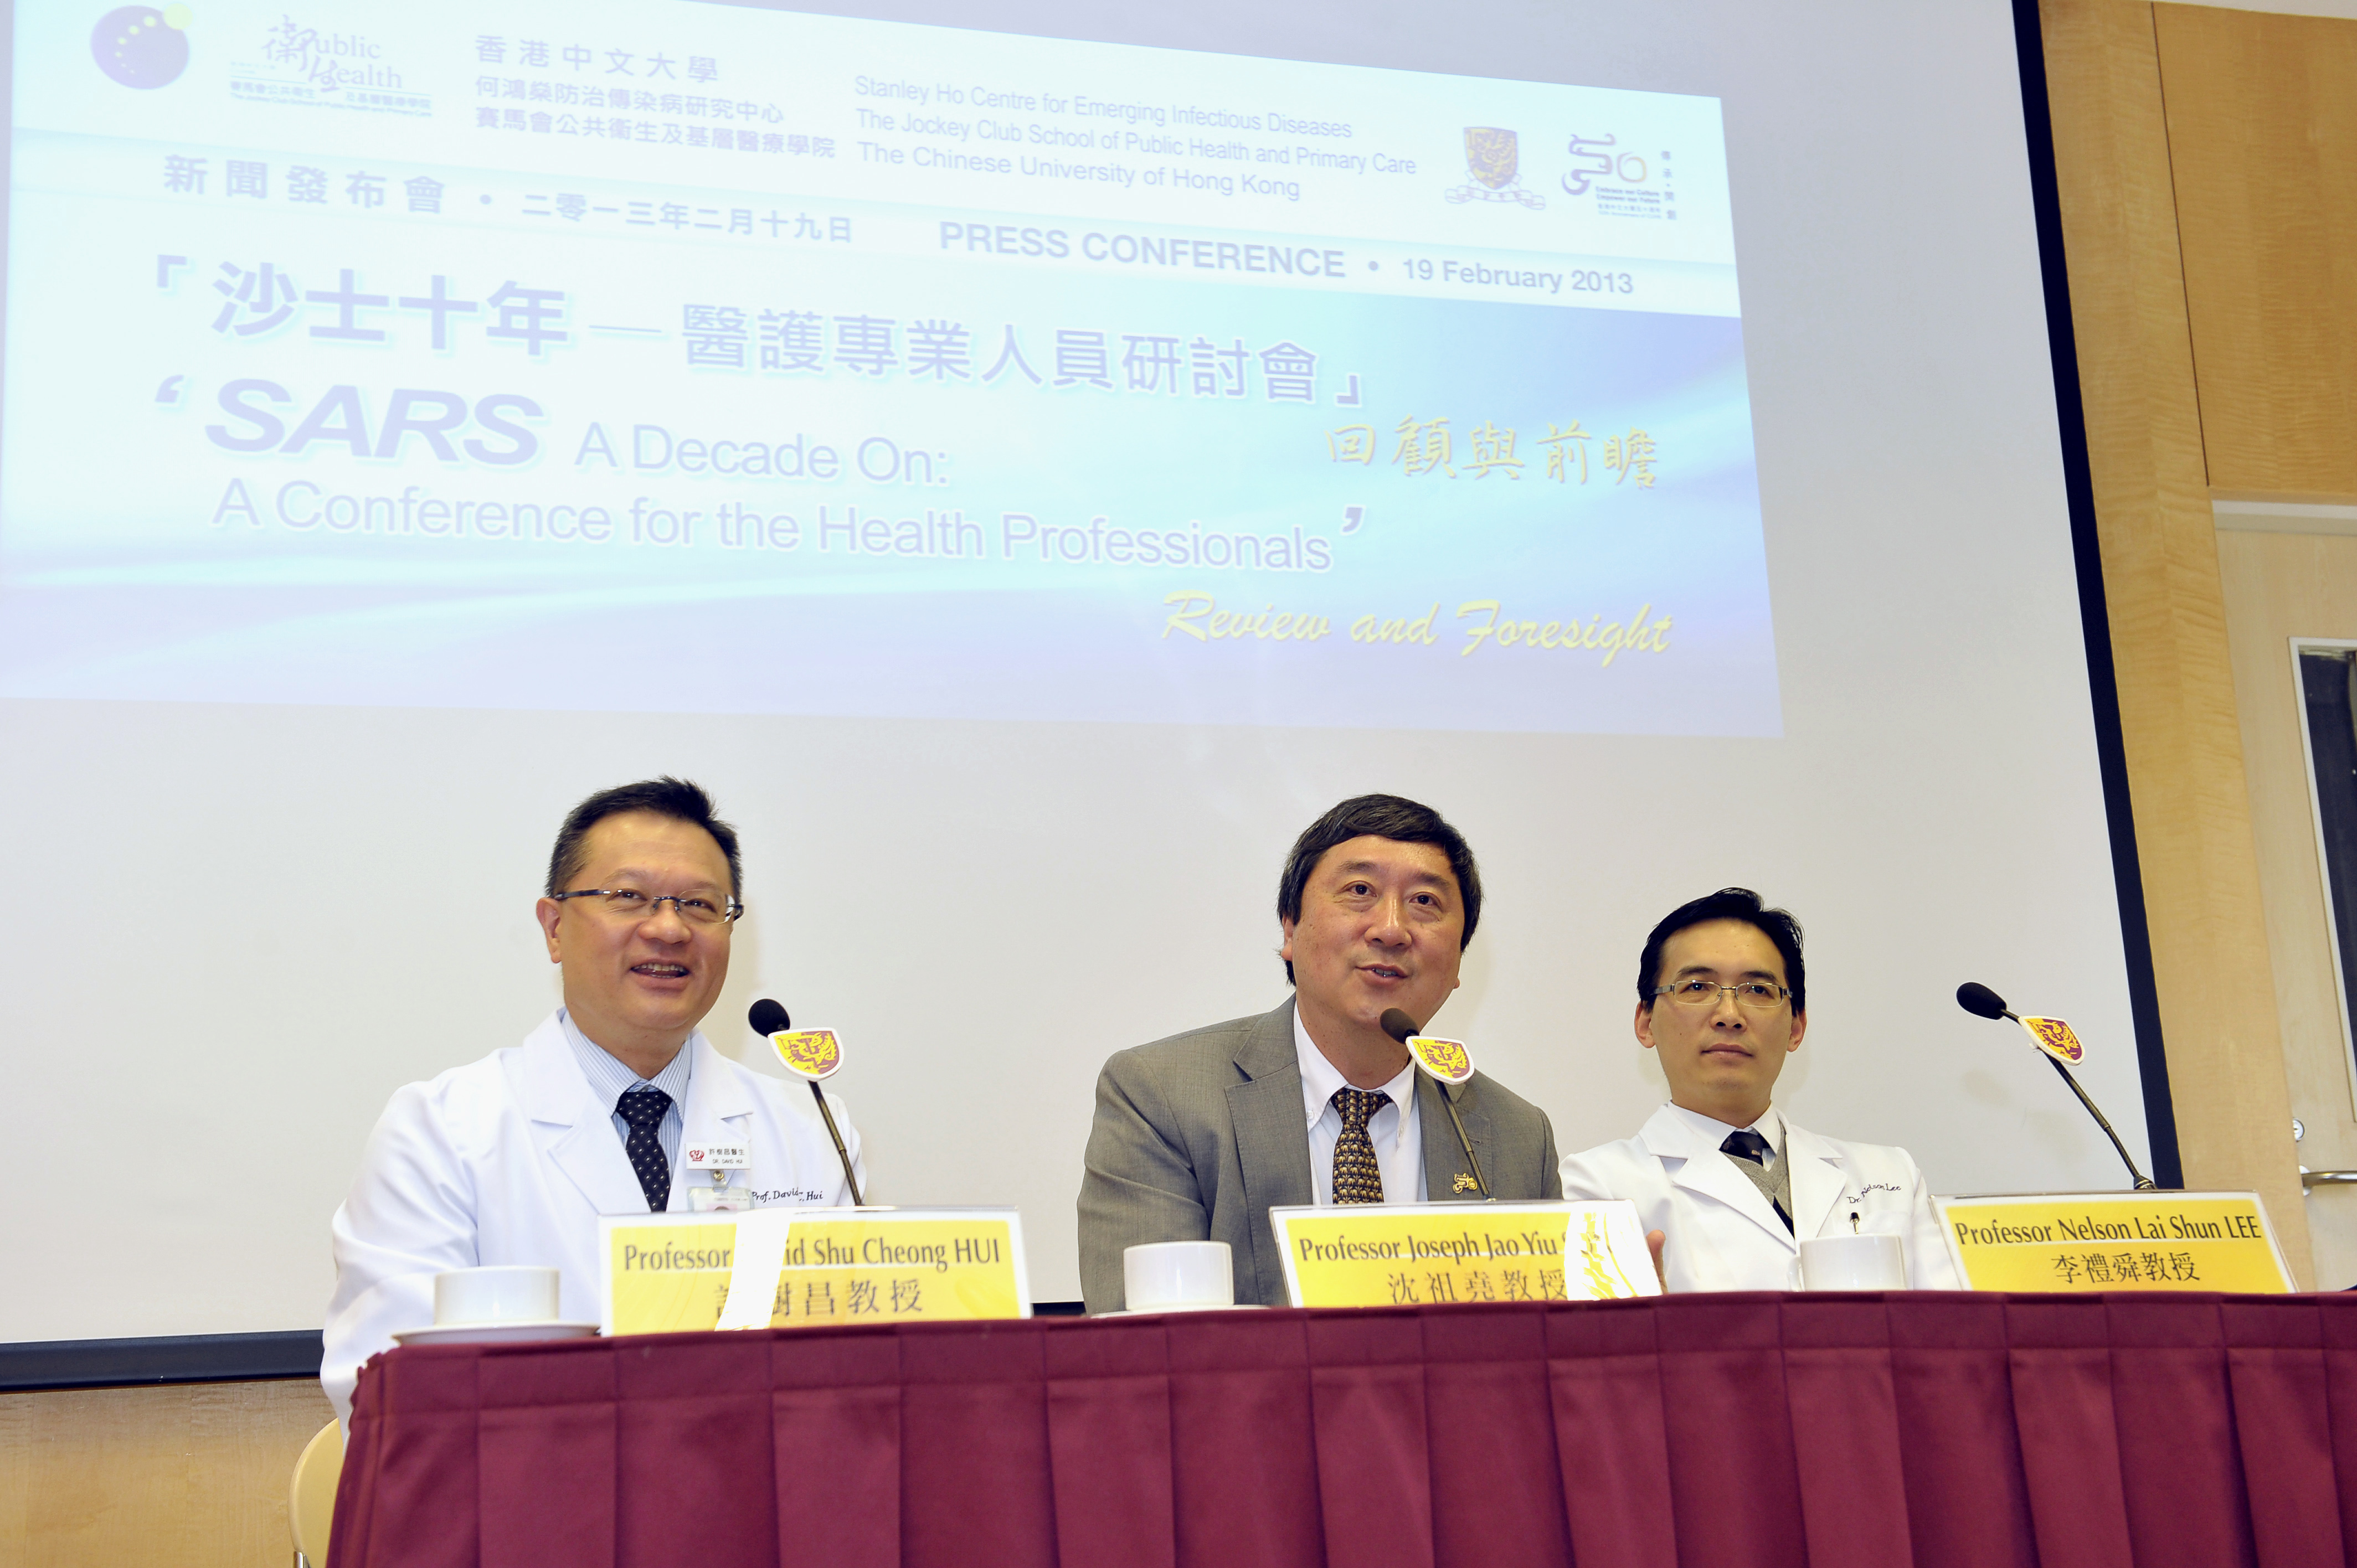 (From left) Prof. David Shu Cheong HUI, Head, Division of Respiratory Medicine, Department of Medicine and Therapeutics; Director, Stanley Ho Centre for Emerging Infectious Diseases, The Jockey Club School of Public Health and Primary Care at CUHK; Prof. Joseph J.Y. Sung, Vice-Chancellor and Mok Hing Yiu Professor of Medicine, CUHK; and Prof. Nelson Lai Shun LEE, Head of Division of Infectious Diseases, Department of Medicine and Therapeutics at CUHK